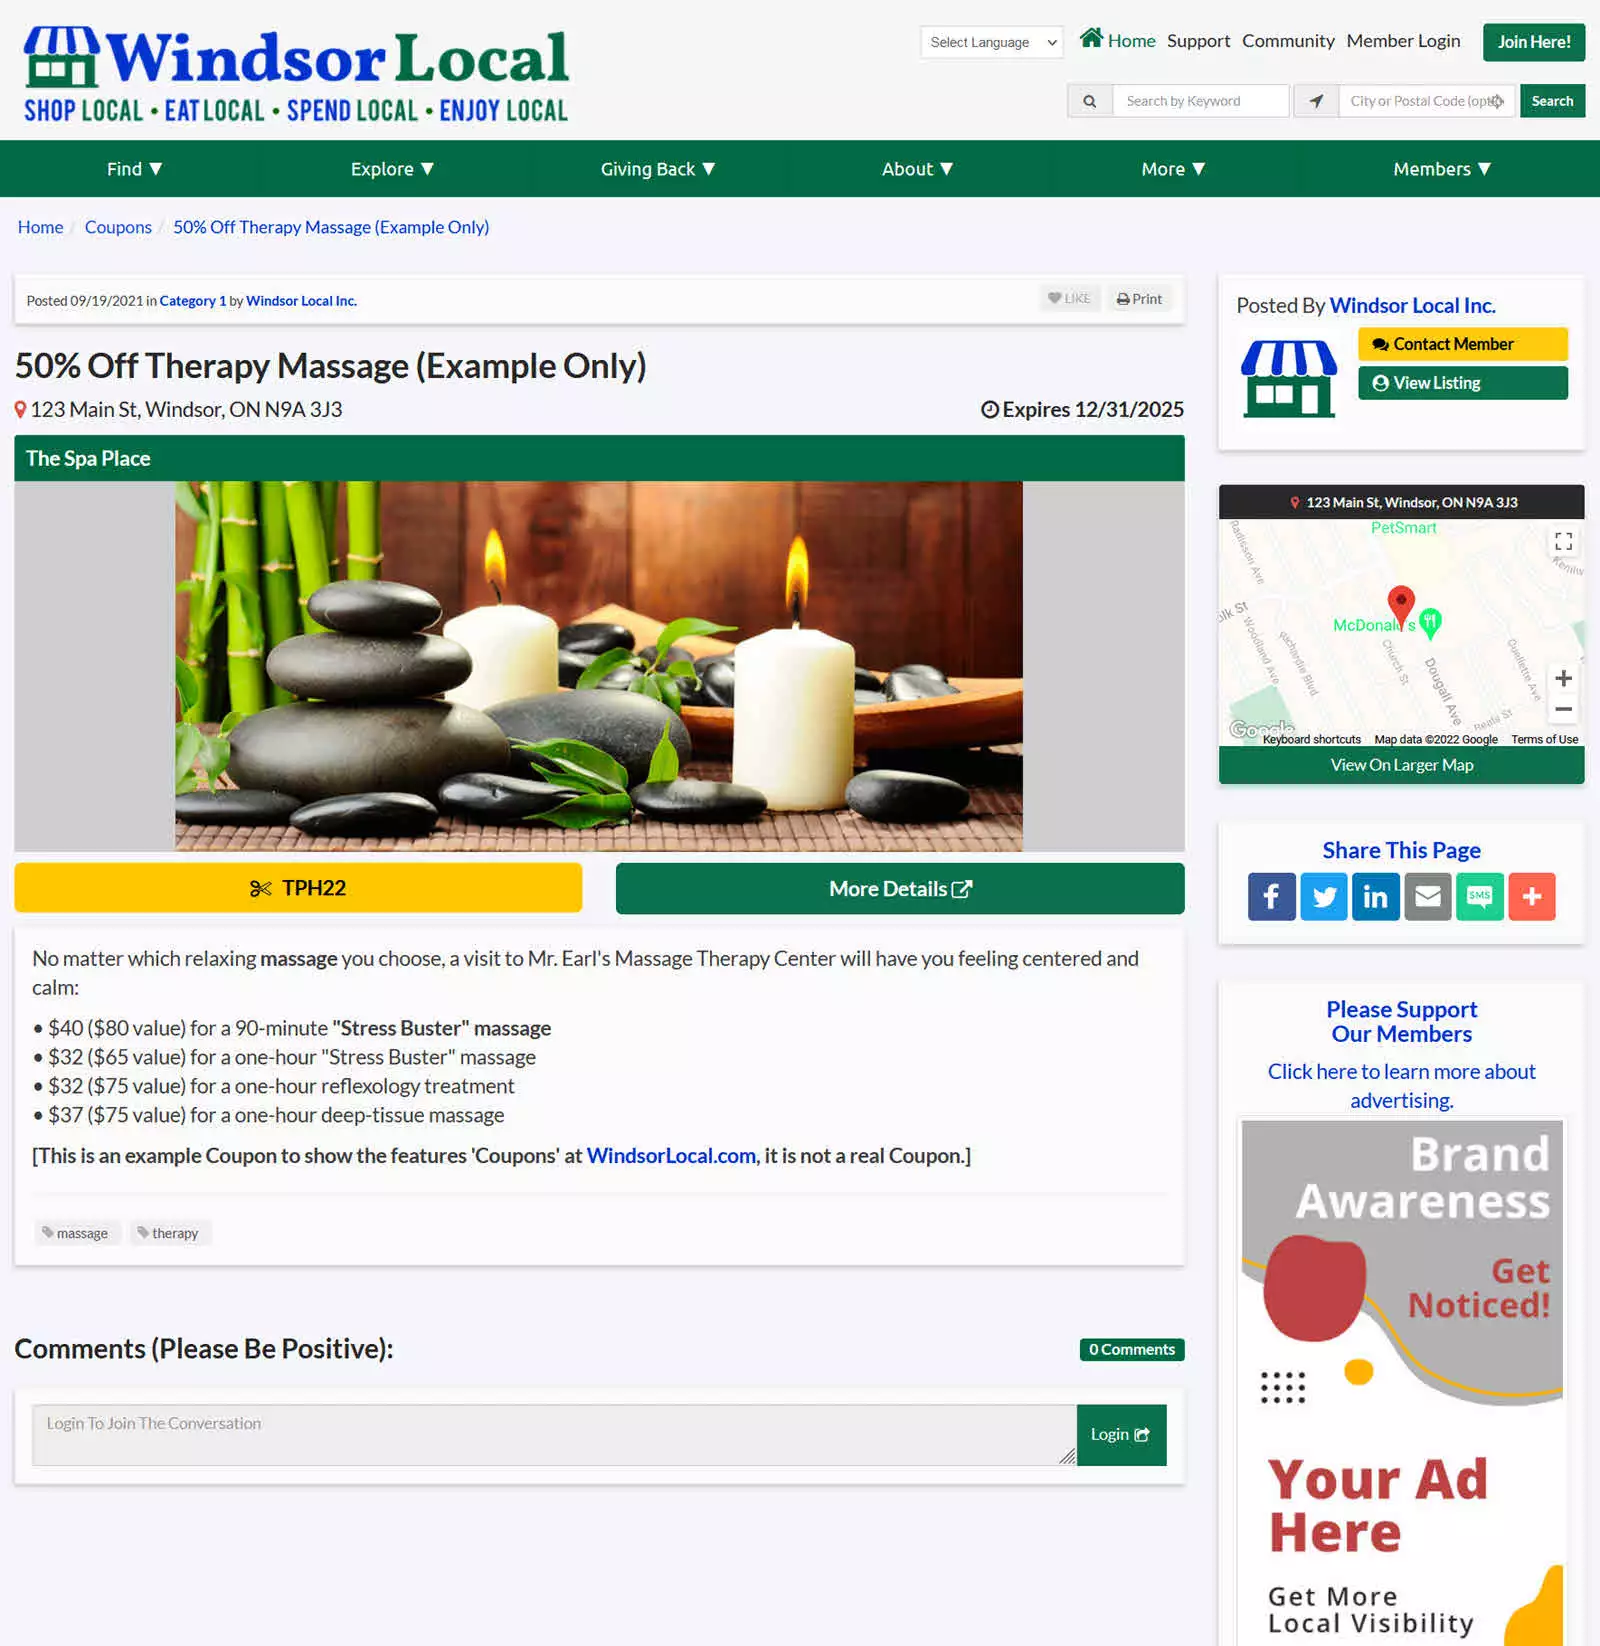 Windsor Local Coupon Details view